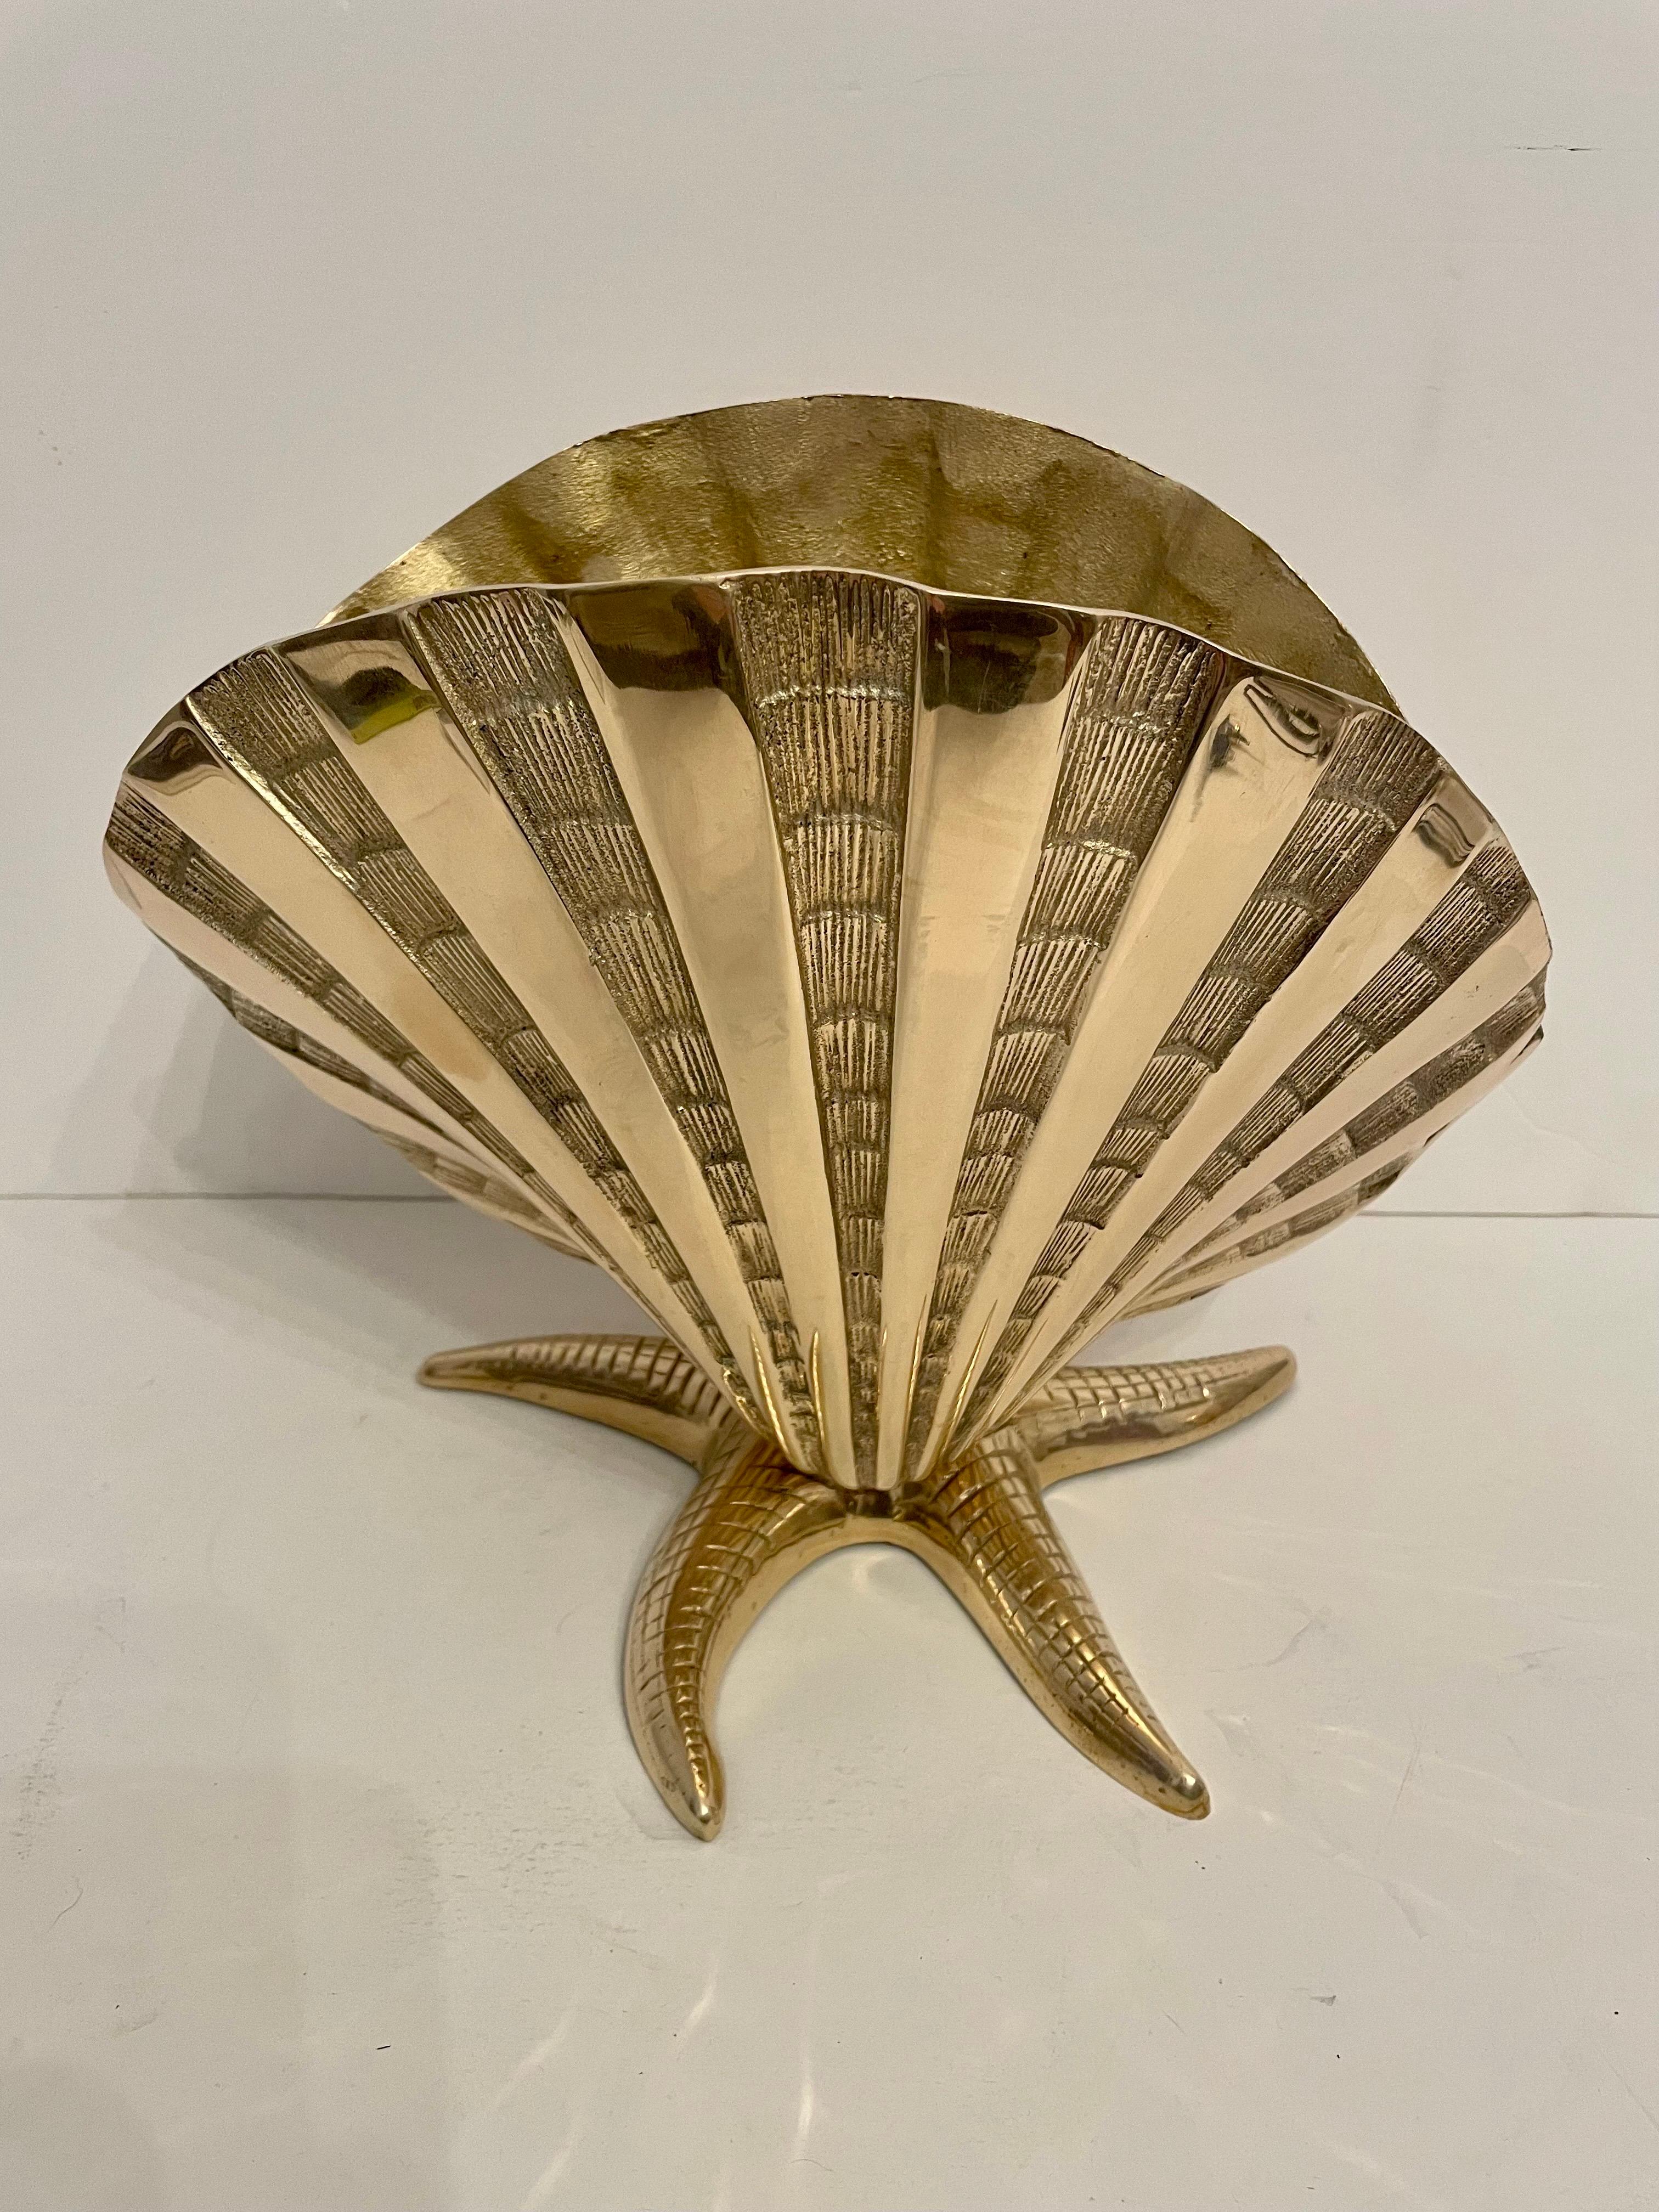 Giant Brass Nautical Clam Shell Seashell on Starfish Base Planter Sculpture For Sale 4